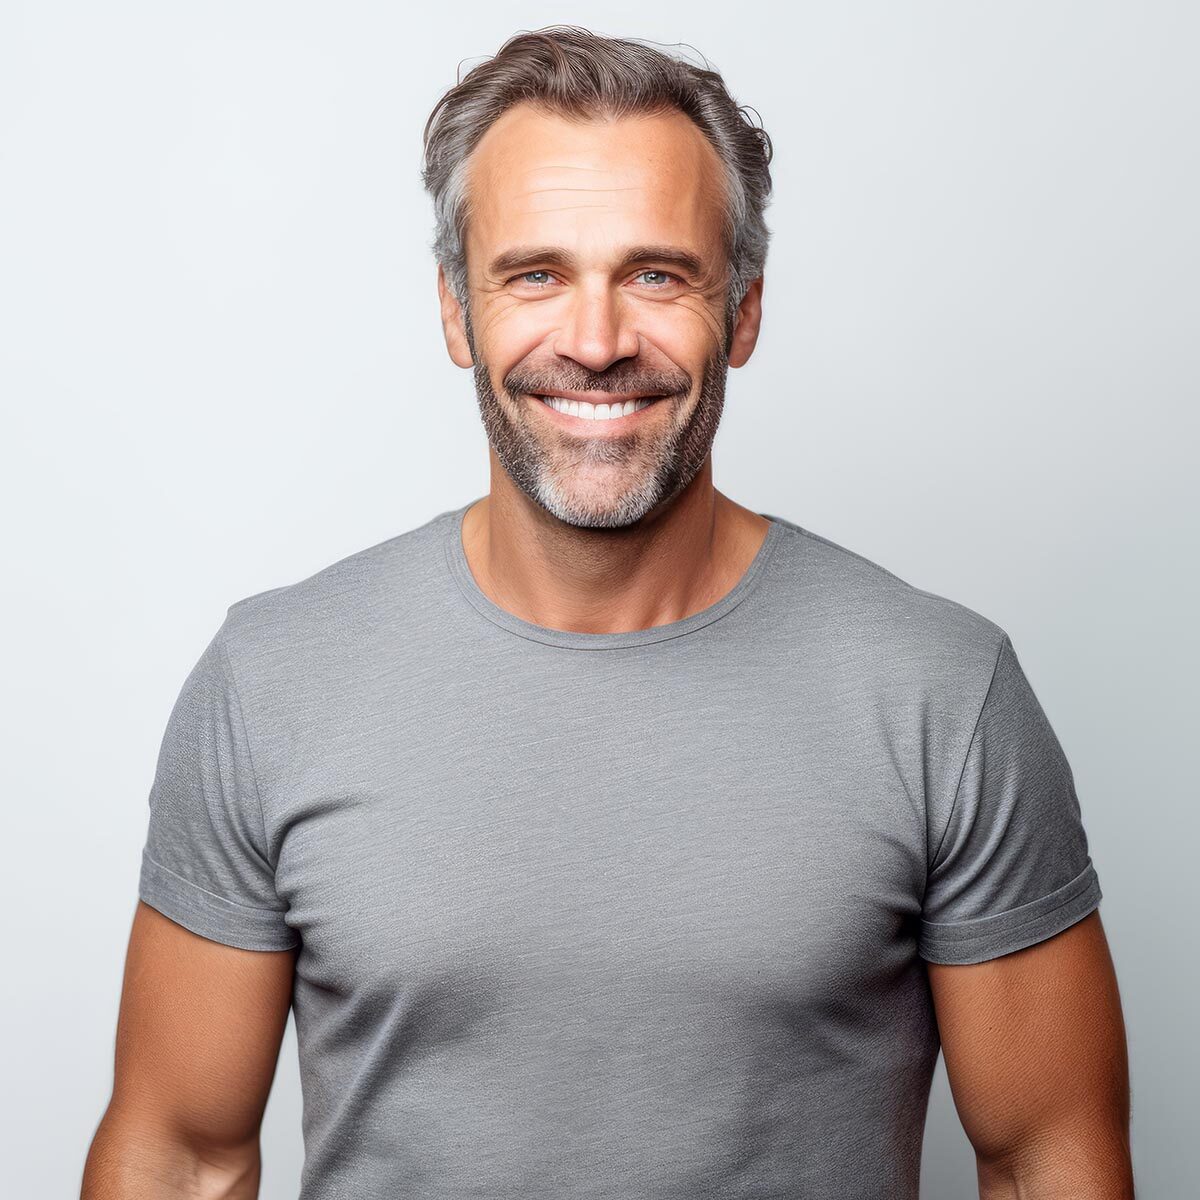 Mature man with grey hair and a grey t-shirt smiling against a light grey background.